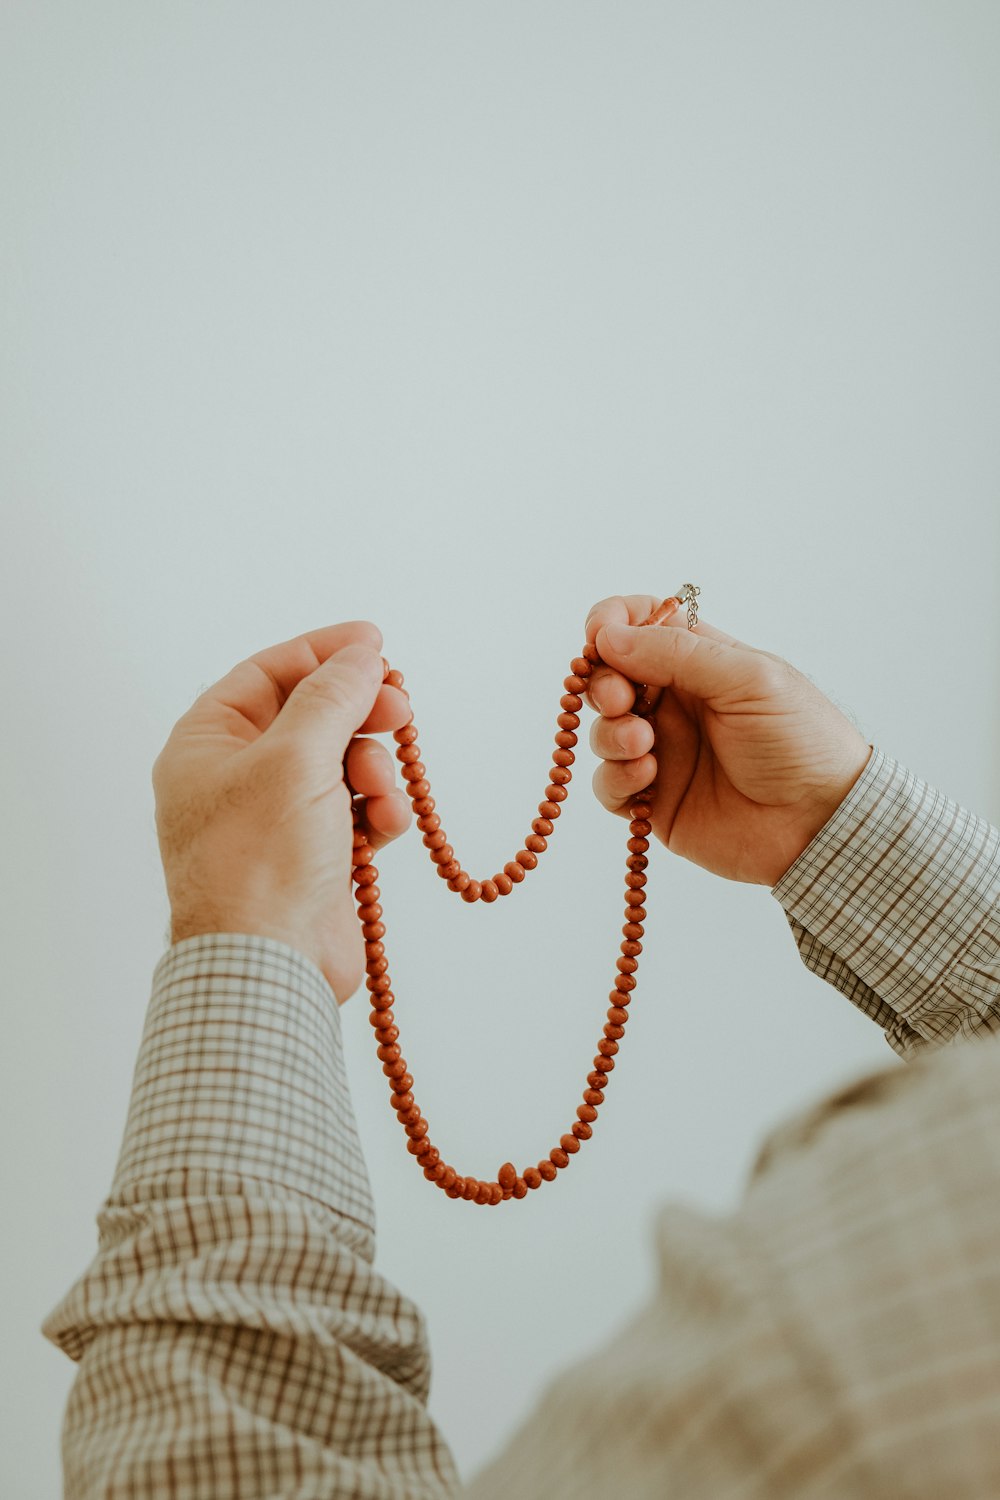 a person holding a rosary in their hands